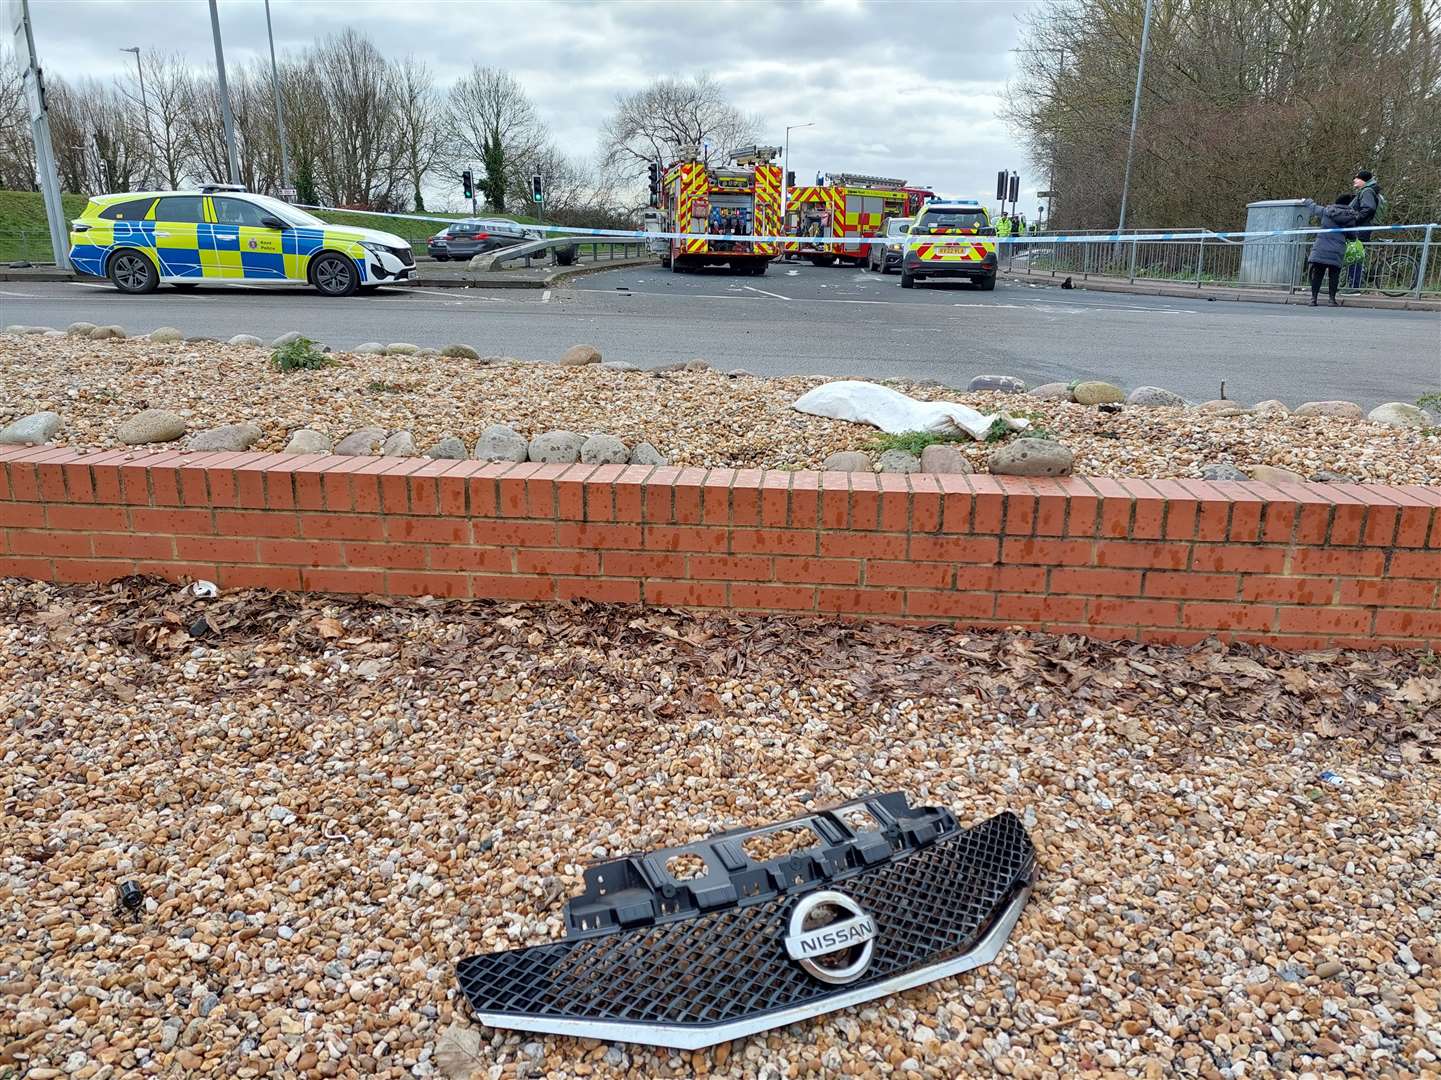 Debris from the grey Nissan is on the nearby roundabout